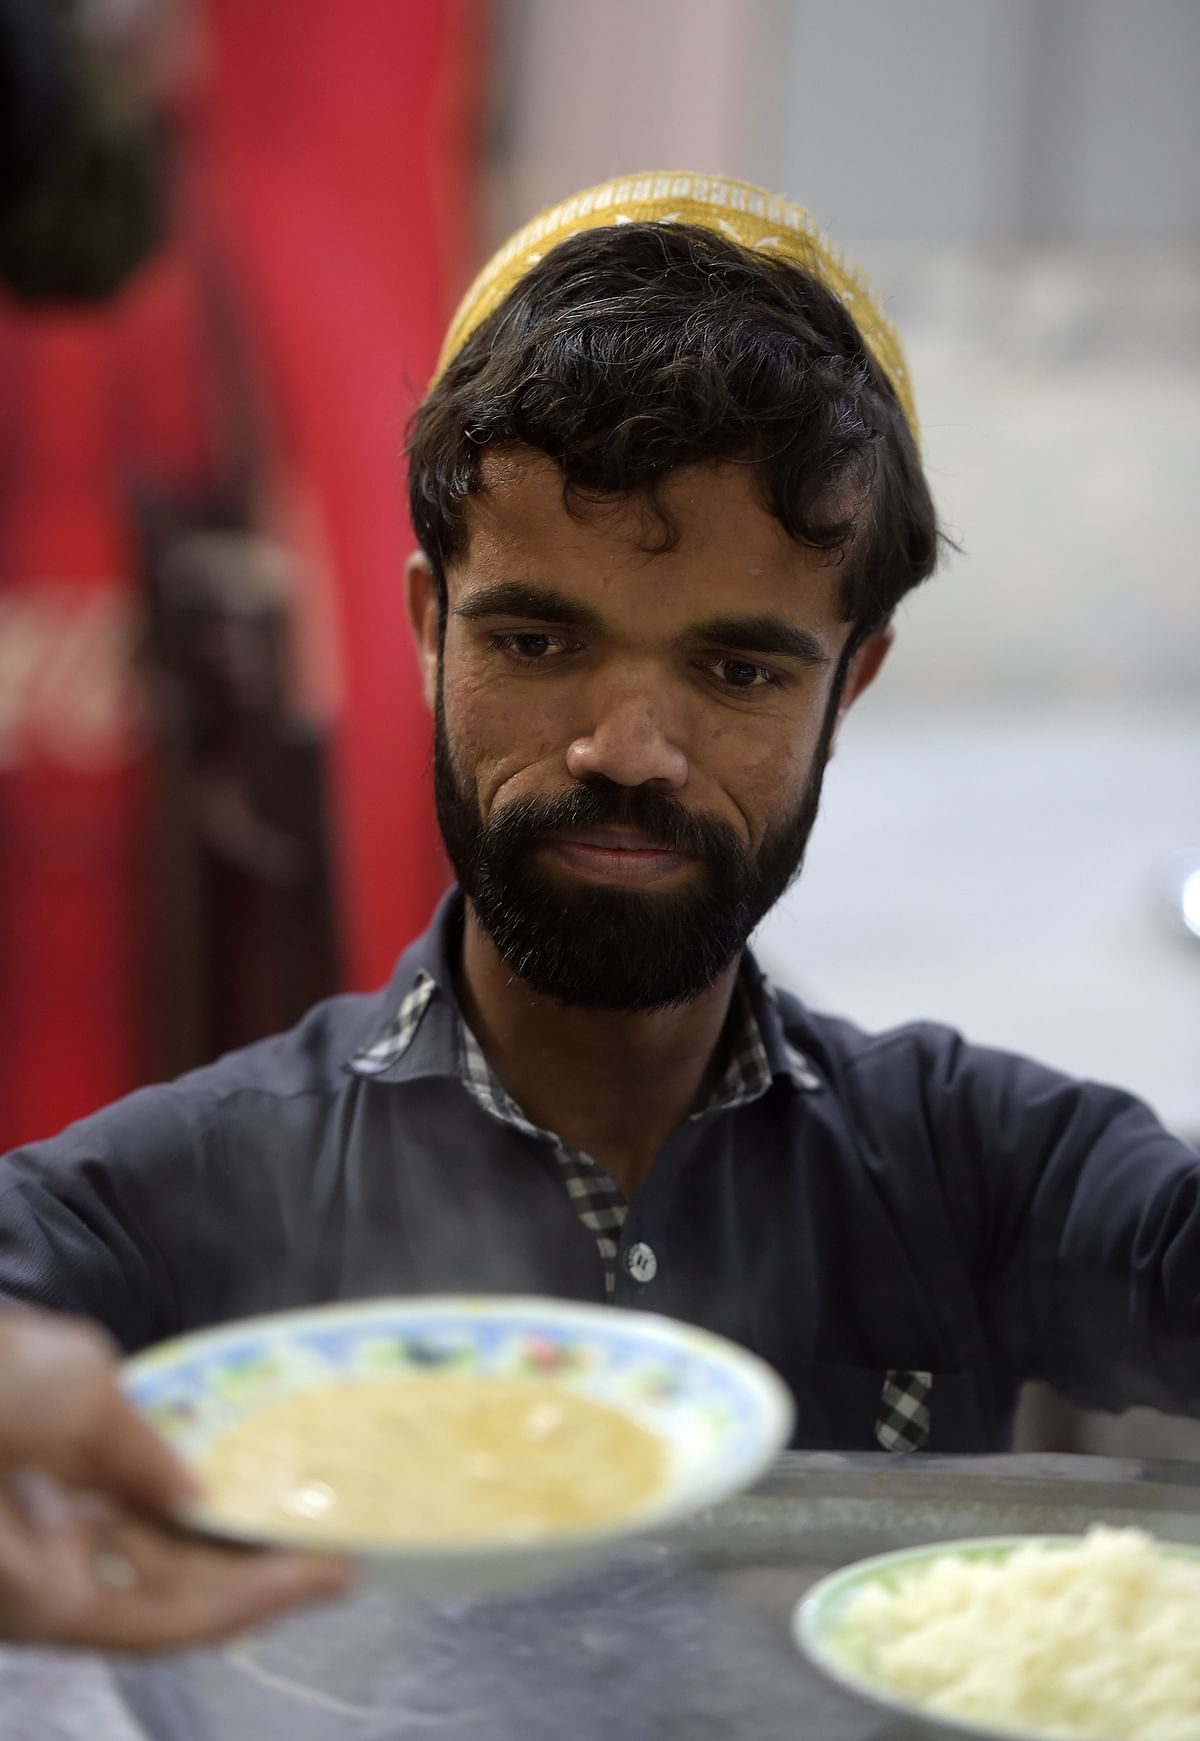 In this picture taken on 22 February 2019, Rozi Khan, a 25-year-old Pakistani waiter who resembles US actor Peter Dinklage, prepares to serve food to customers at Dilbar Hotel in Rawalpindi. Photo: AFP